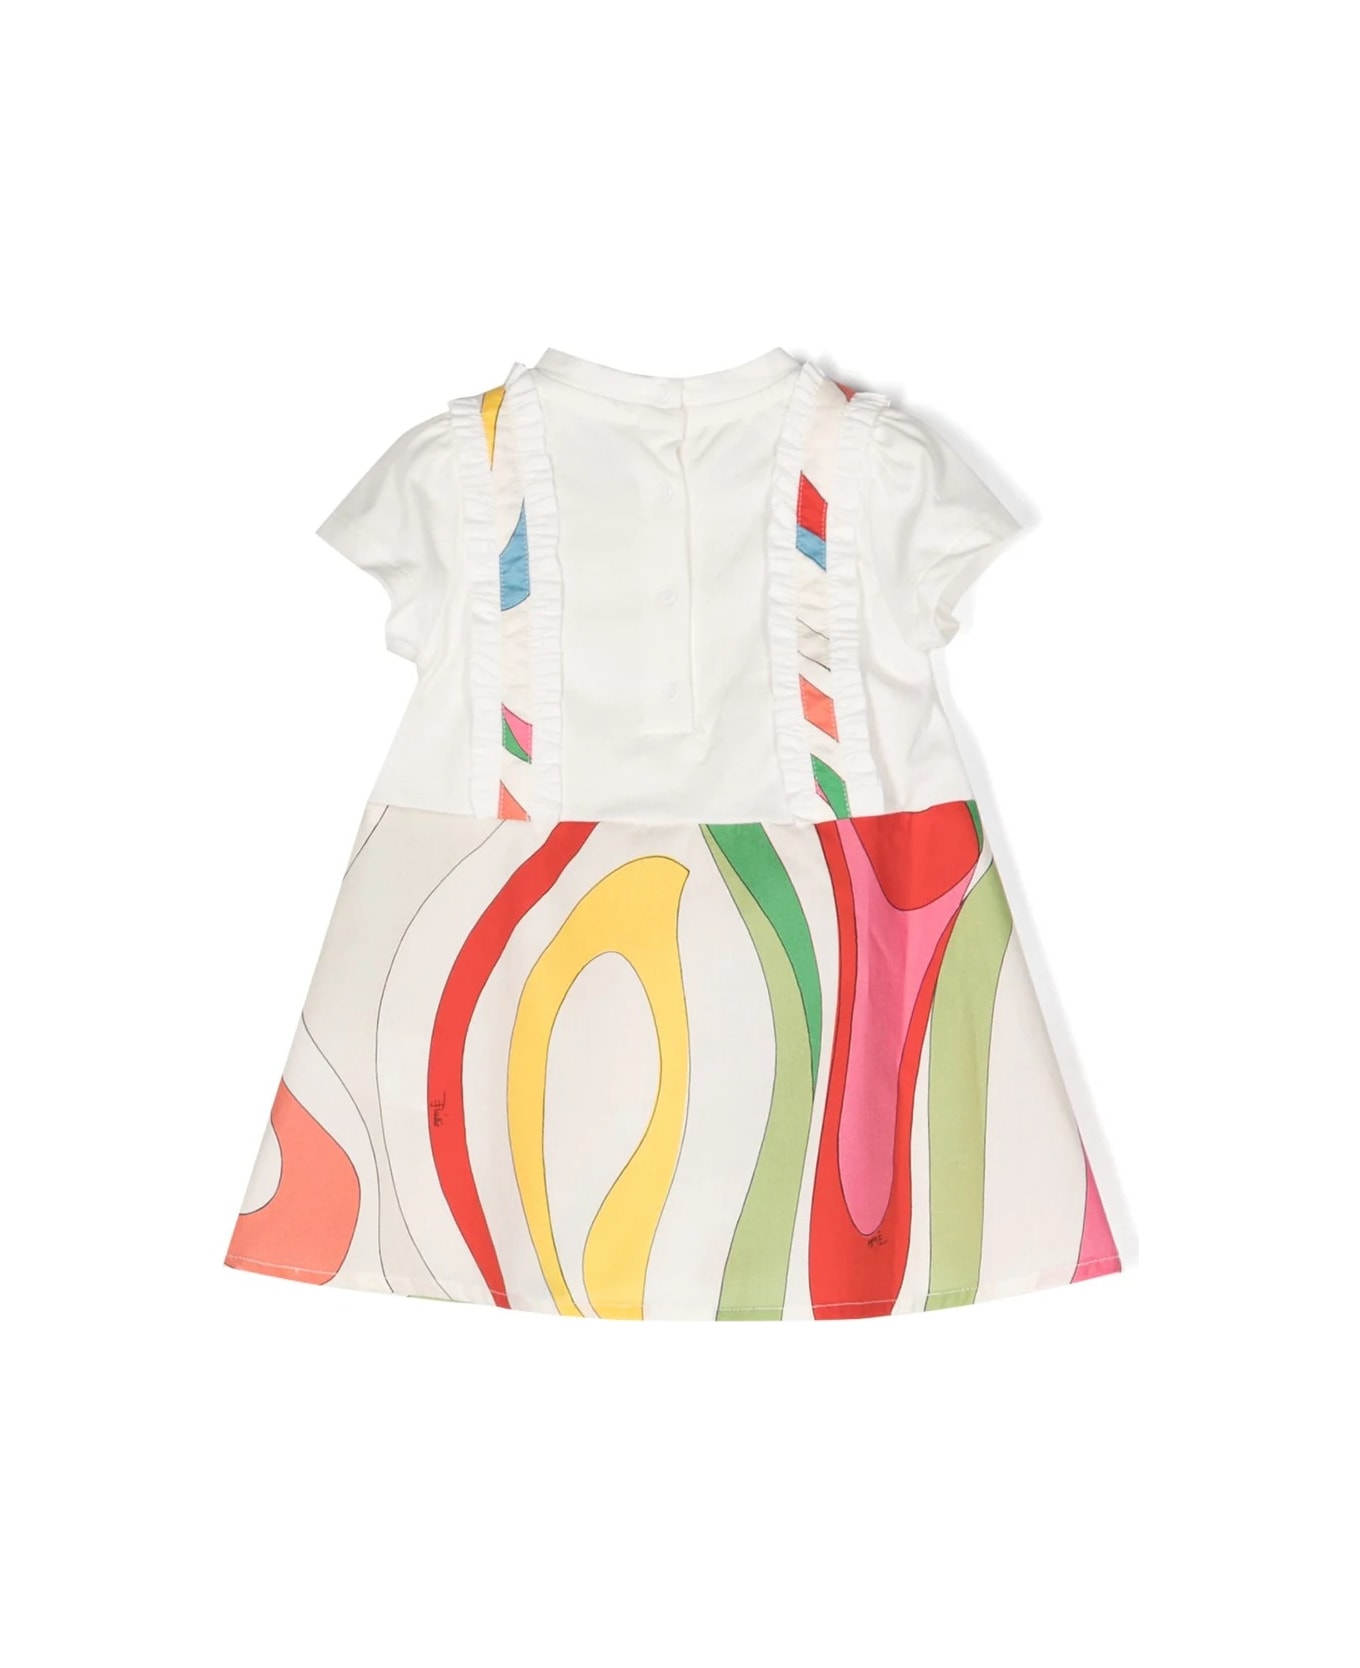 Emilio Pucci White Short-sleeved Dress With Marble Print - MULTICOLORE